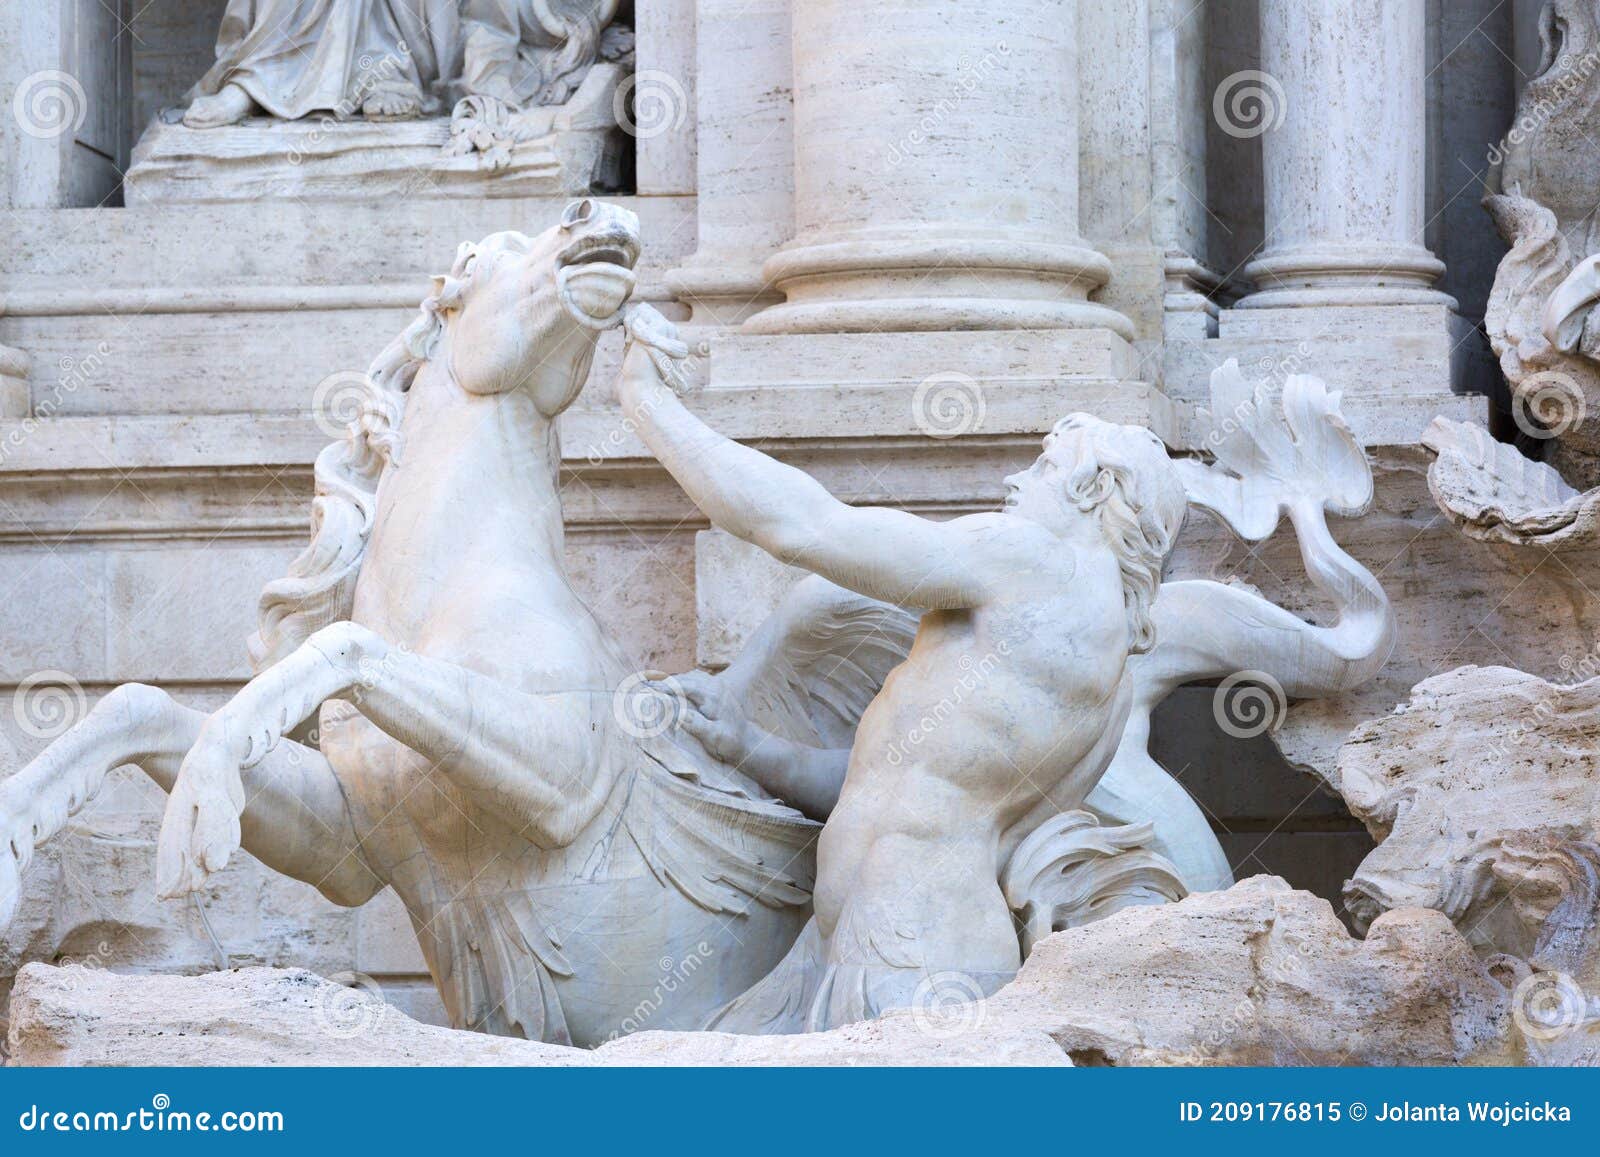 18th century trevi fountain  character of triton with a horse  rome  italy